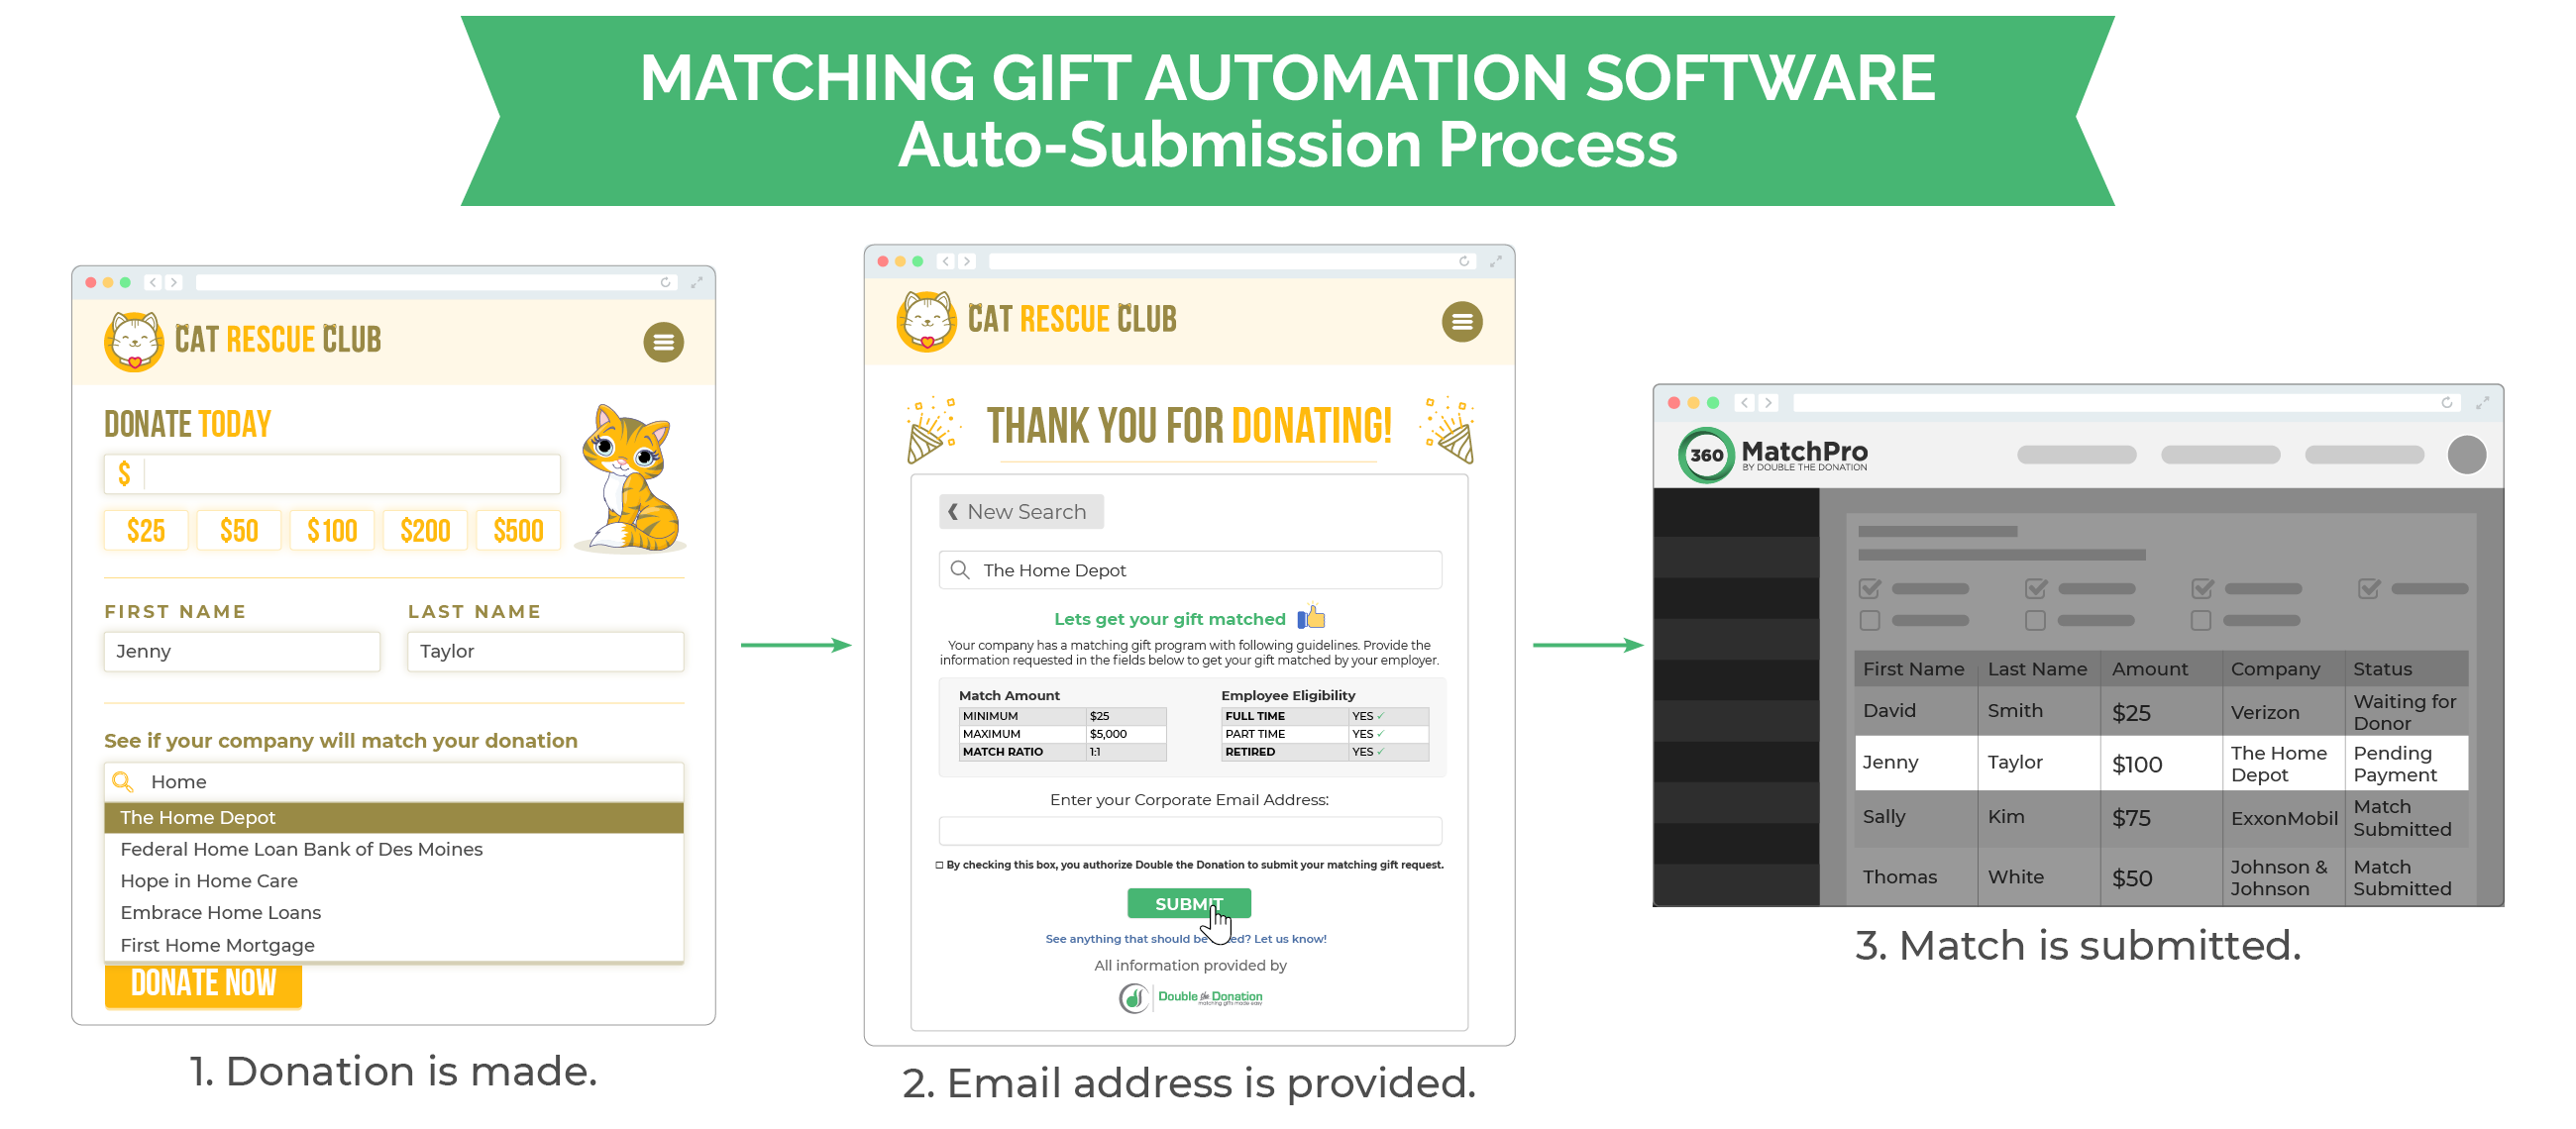 Overview of matching gift auto-submission with Innovative Discovery